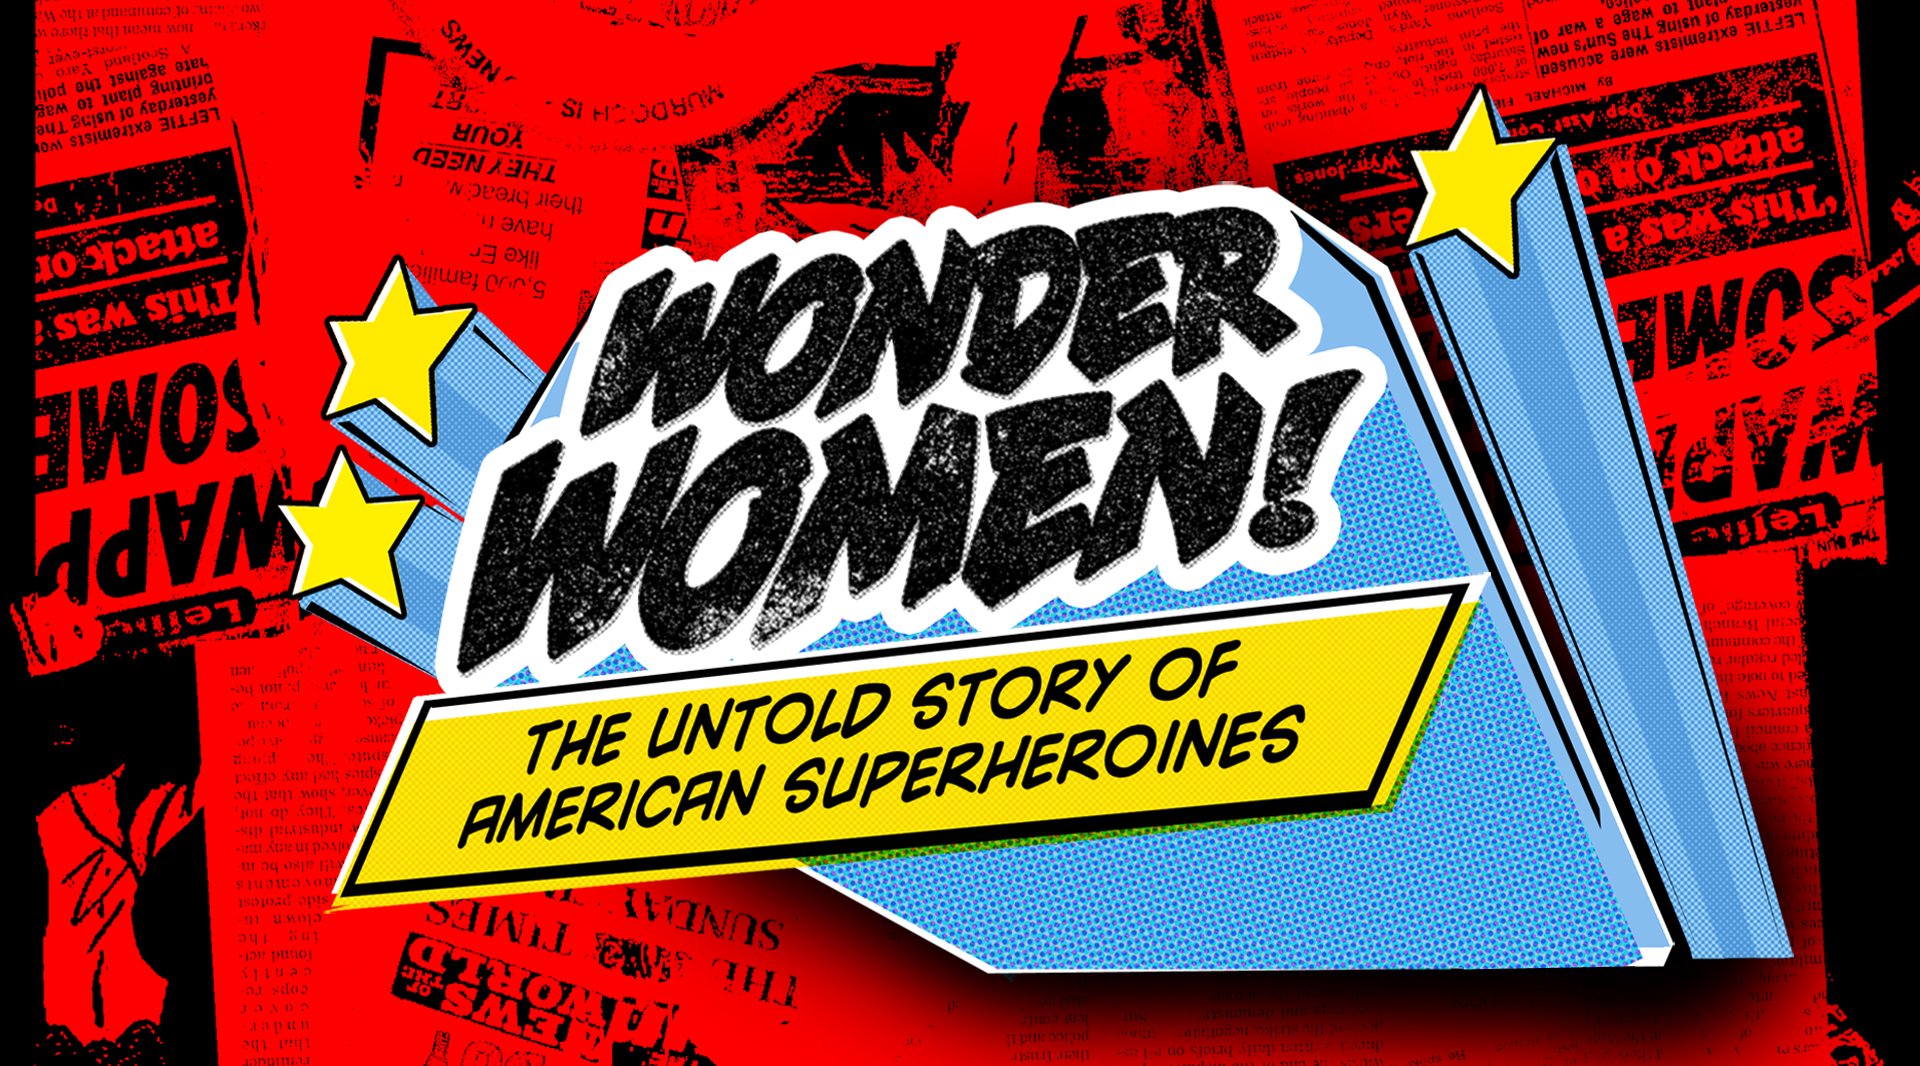 Editor’s Letter: The History of American Superheroines